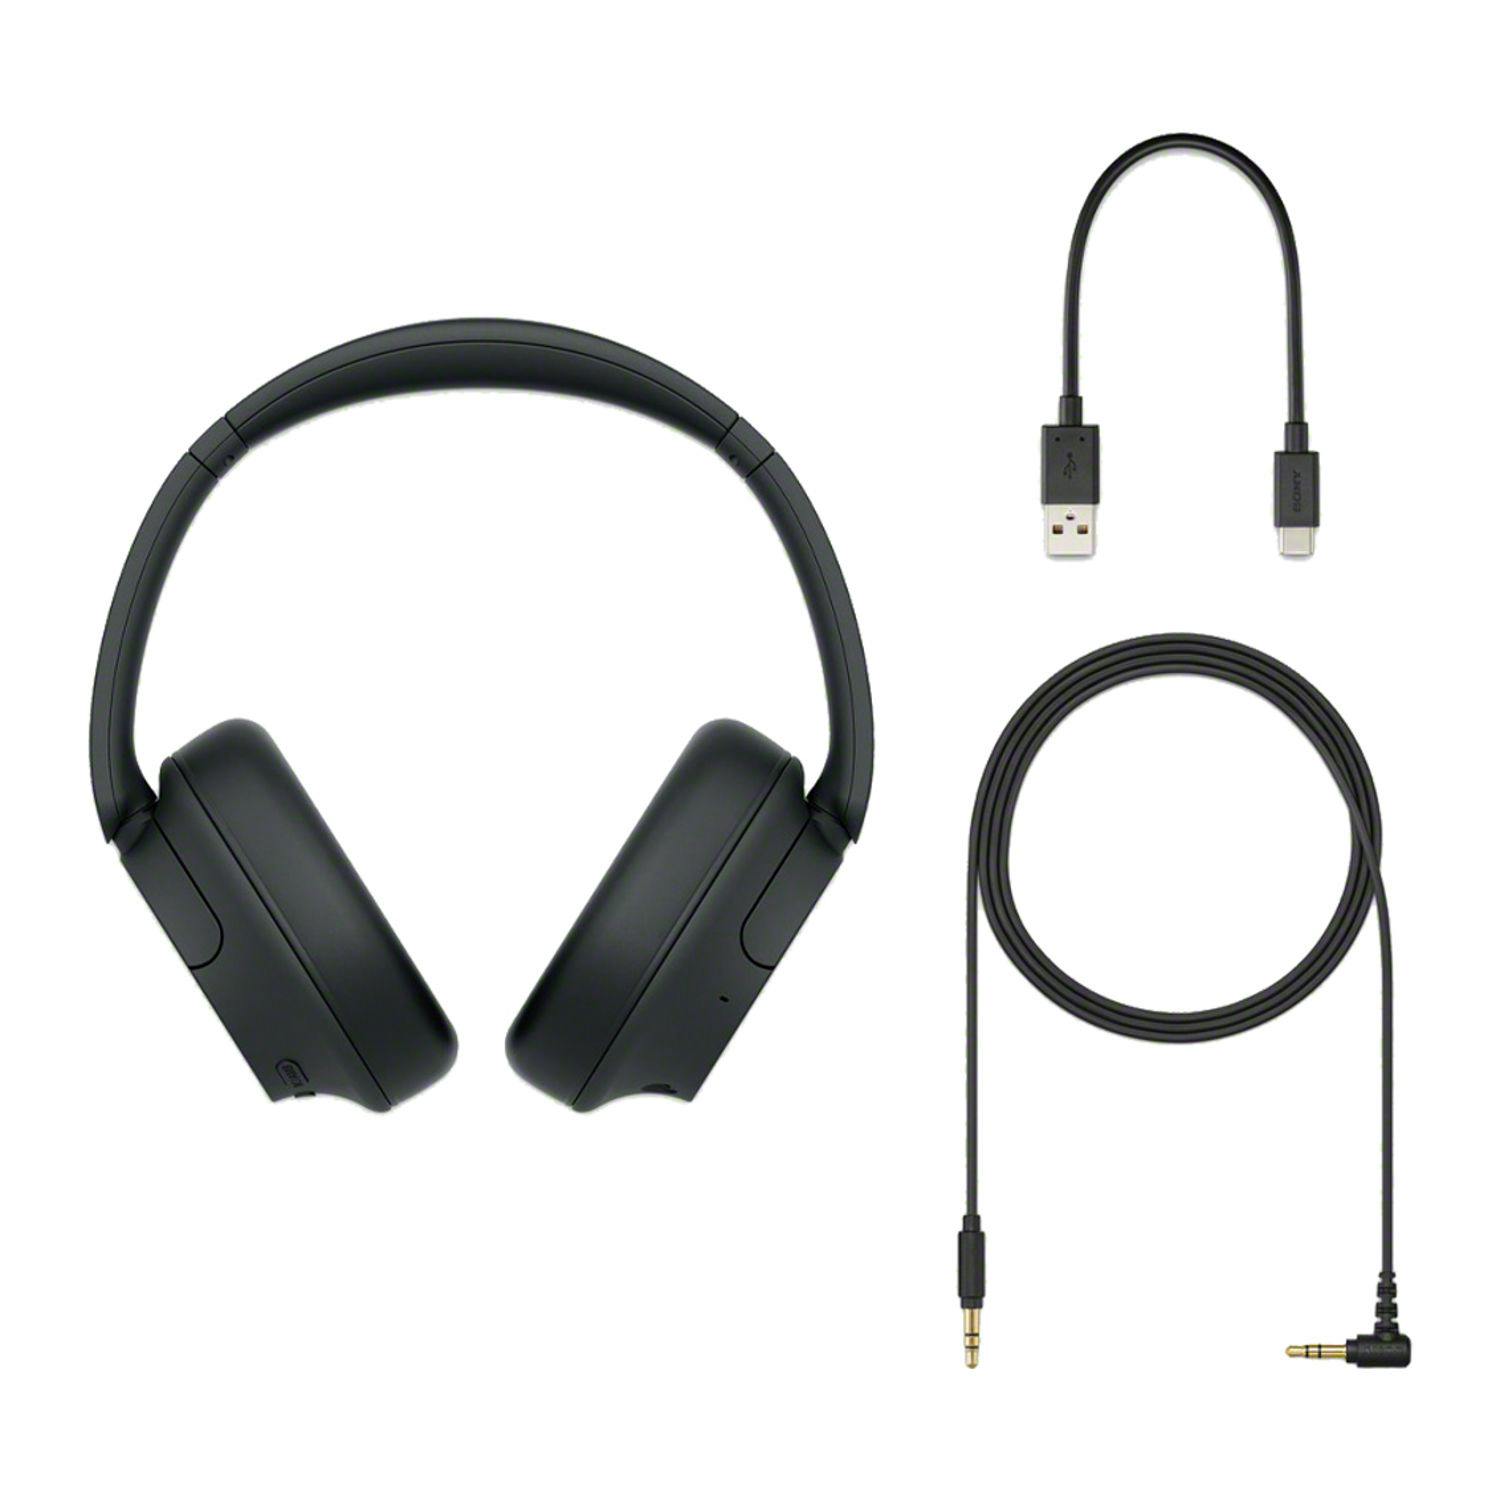 Sony WH-CH520 Wireless Headphones with Microphone - additional Image 4